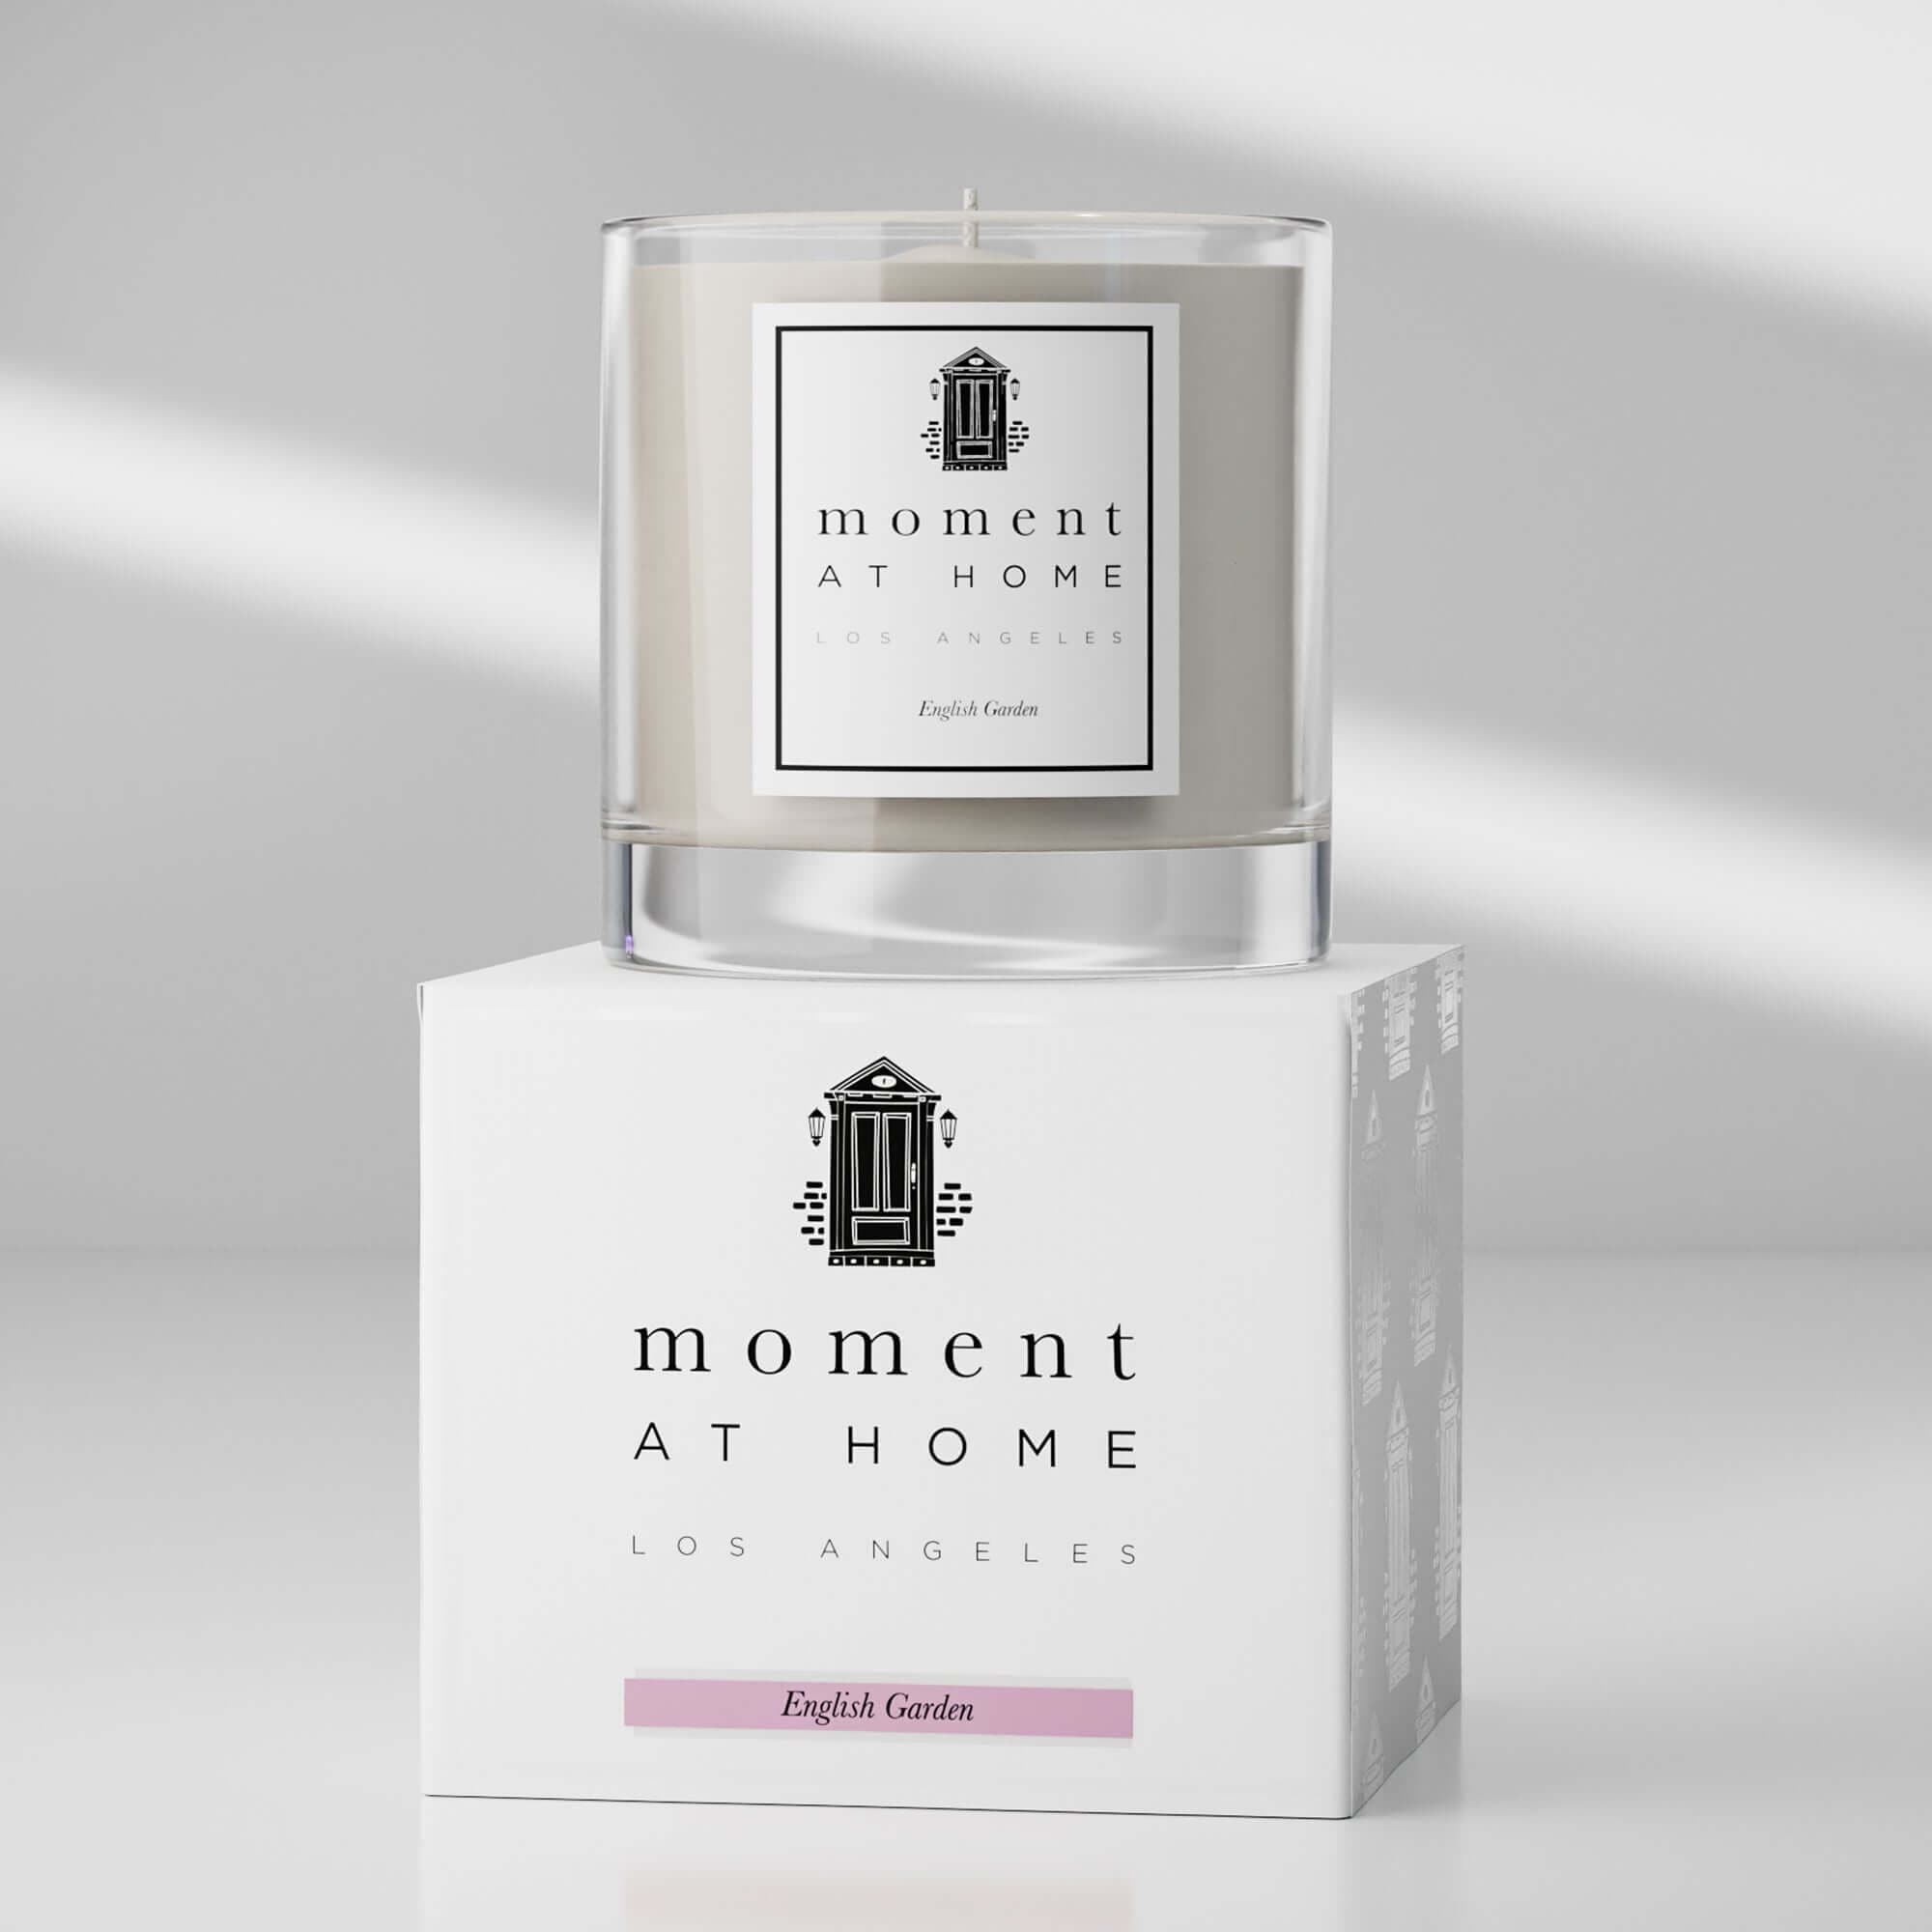 The English Garden Scented Coconut Wax Candle by Moment At Home